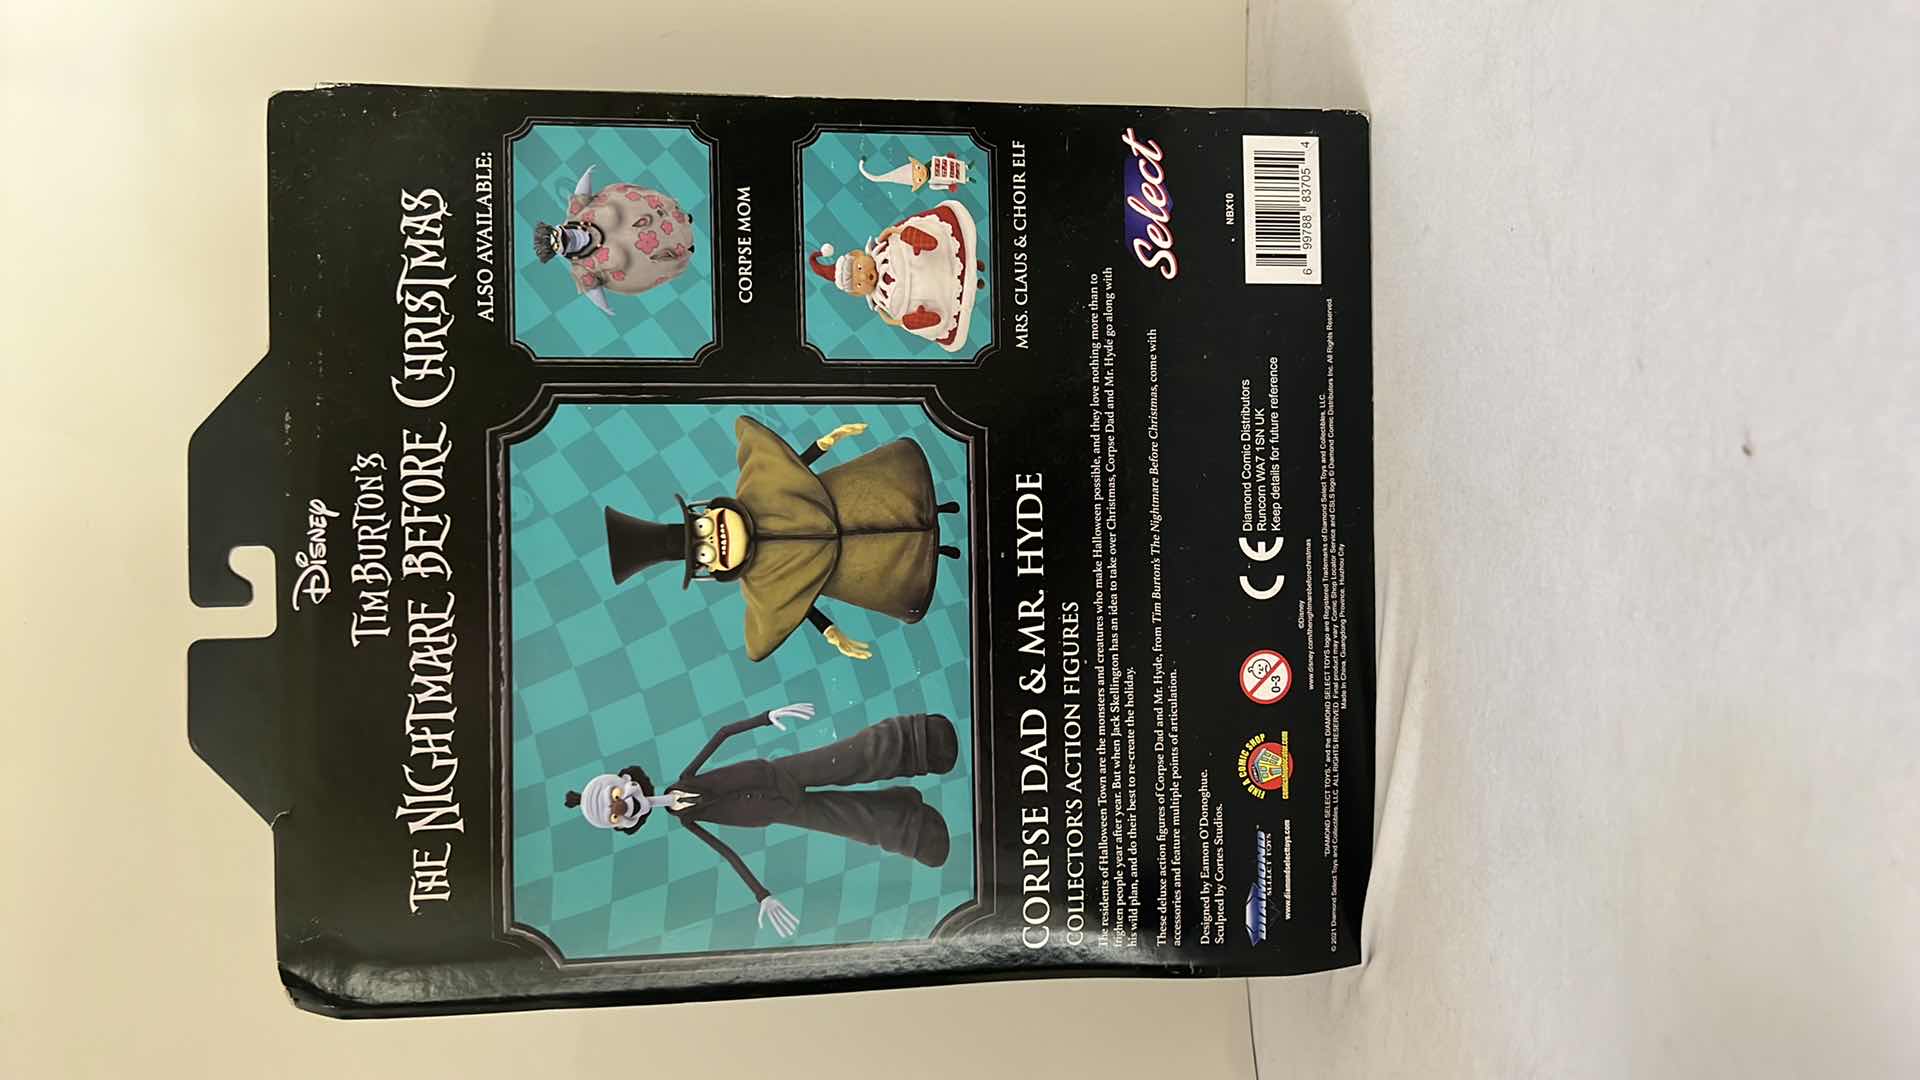 Photo 2 of BRAND NEW DISNEY TIM BURTON TGE NIGHTMARE BEFORE CHRISTMAS “CORPSE DAD & MR.HYDE” COLLECTORS ACTION FIGURES $34